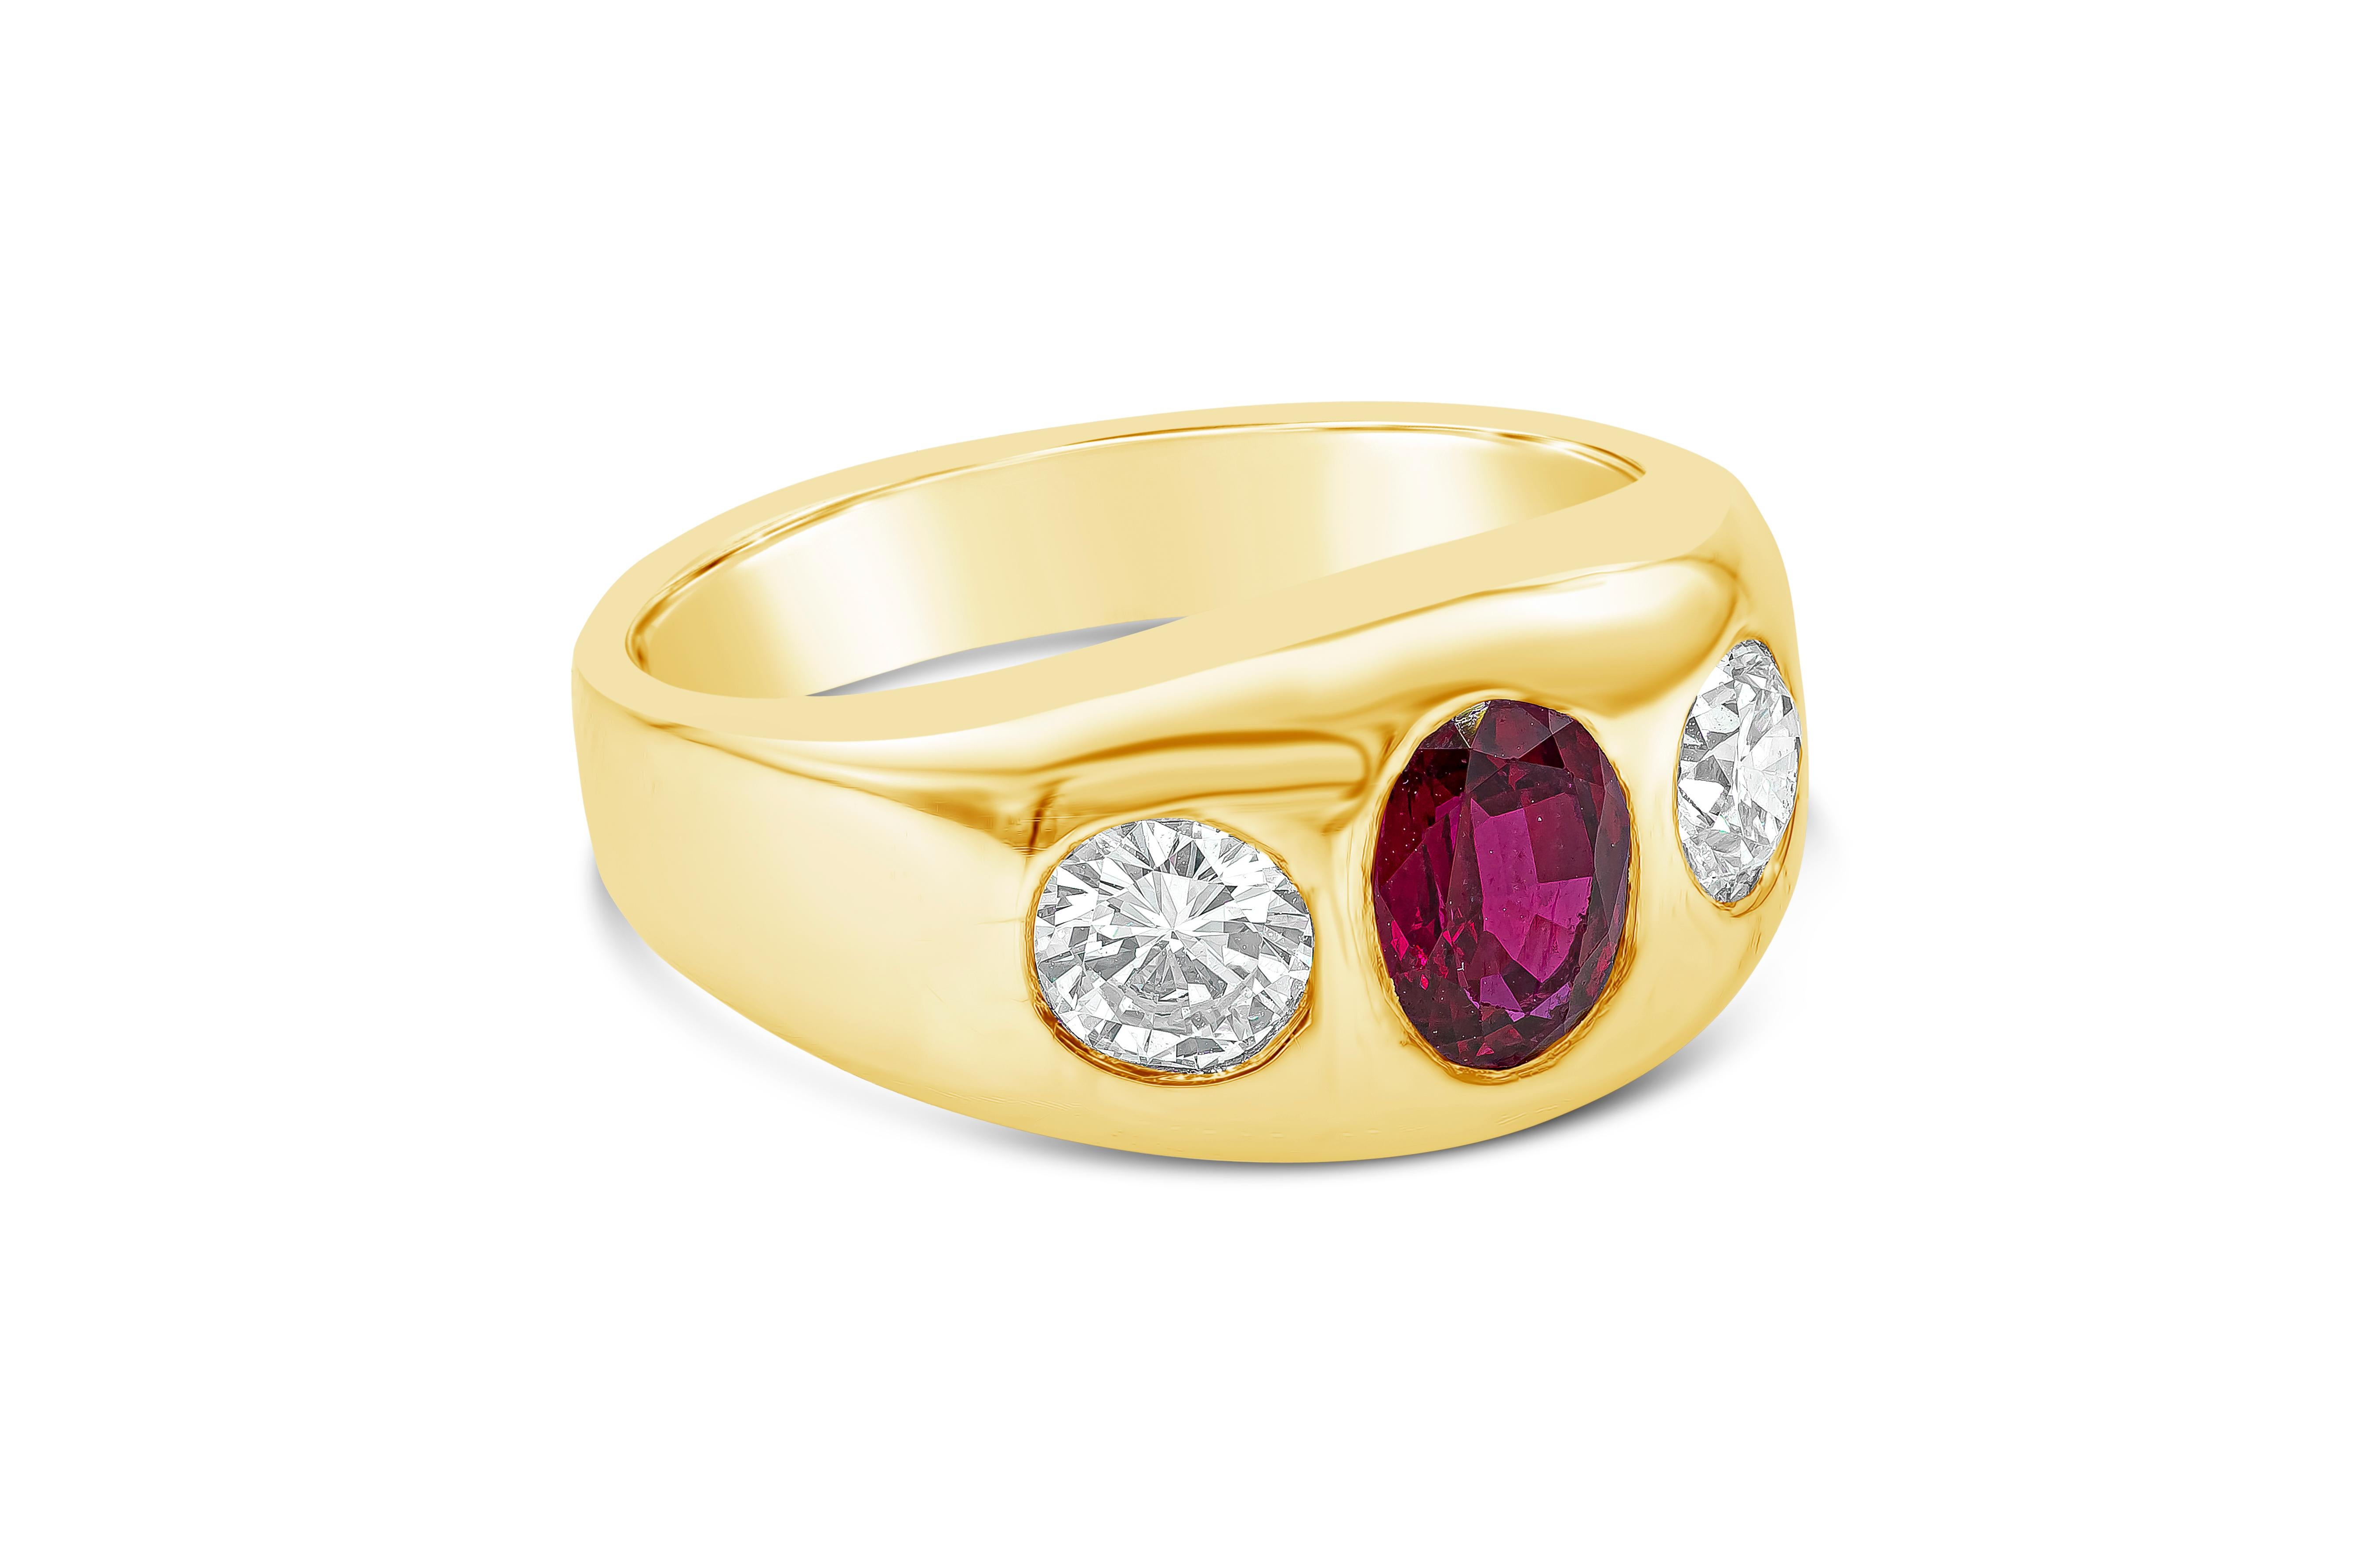 Showcasing a 1.08 carat oval cut ruby and two round cut diamonds weighing a total of 1.10 carats total. Flush set in 18k yellow gold. Accompanied with AGL report. 
size 9.5 US (sizable)

Style available in different price ranges. Prices are based on